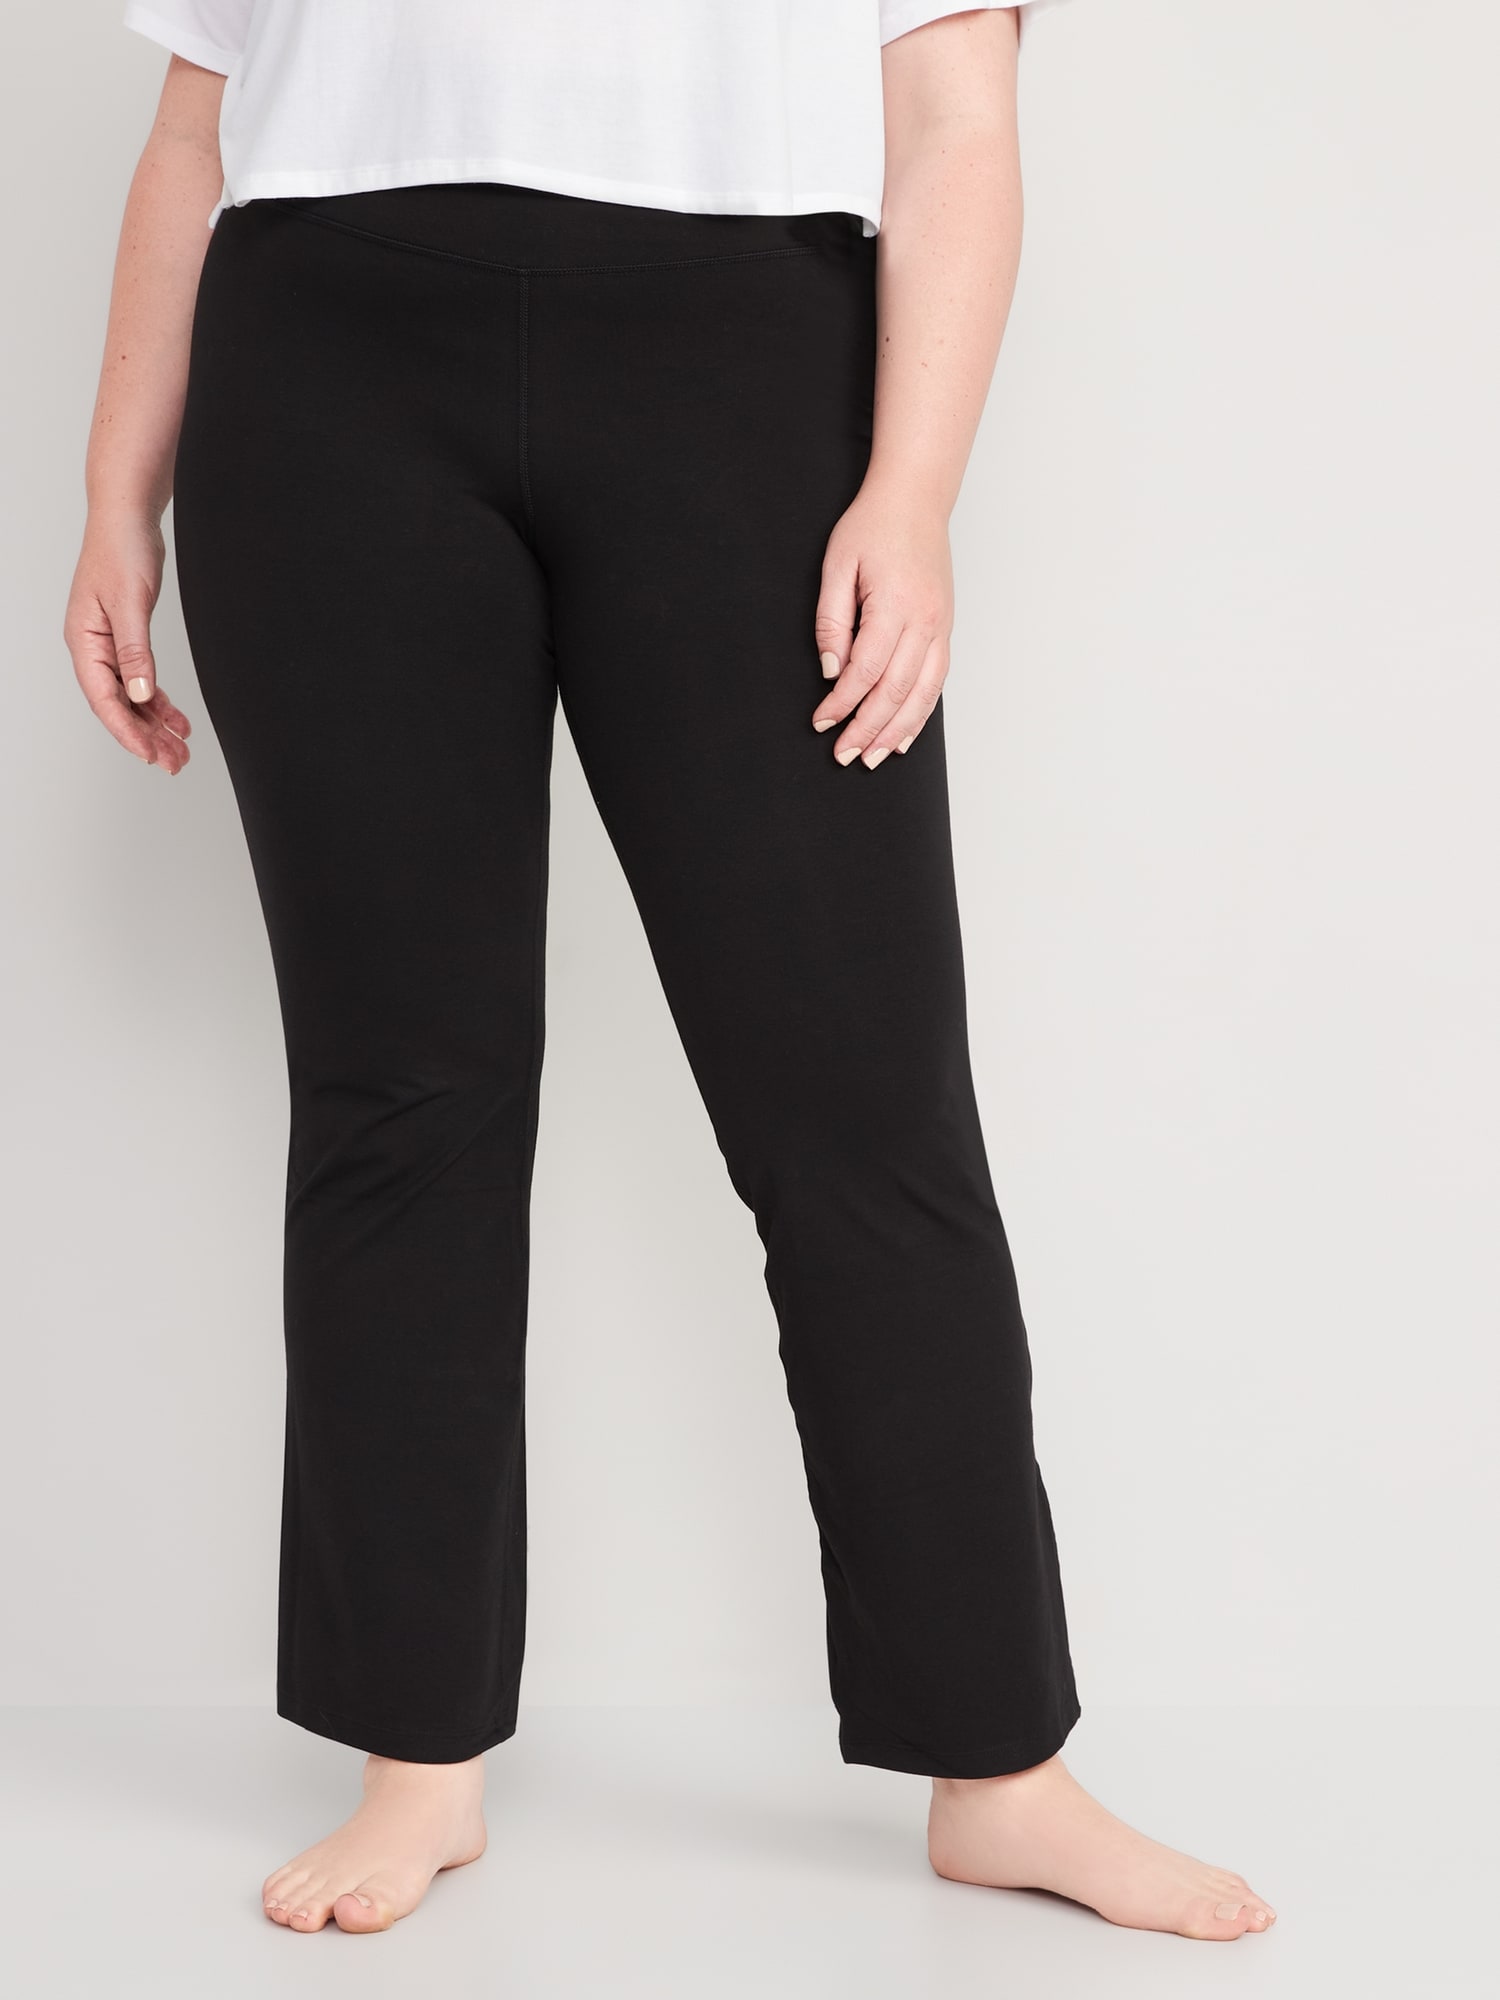 Old Navy Extra High-Waisted PowerChill Slim Boot-Cut Pants for